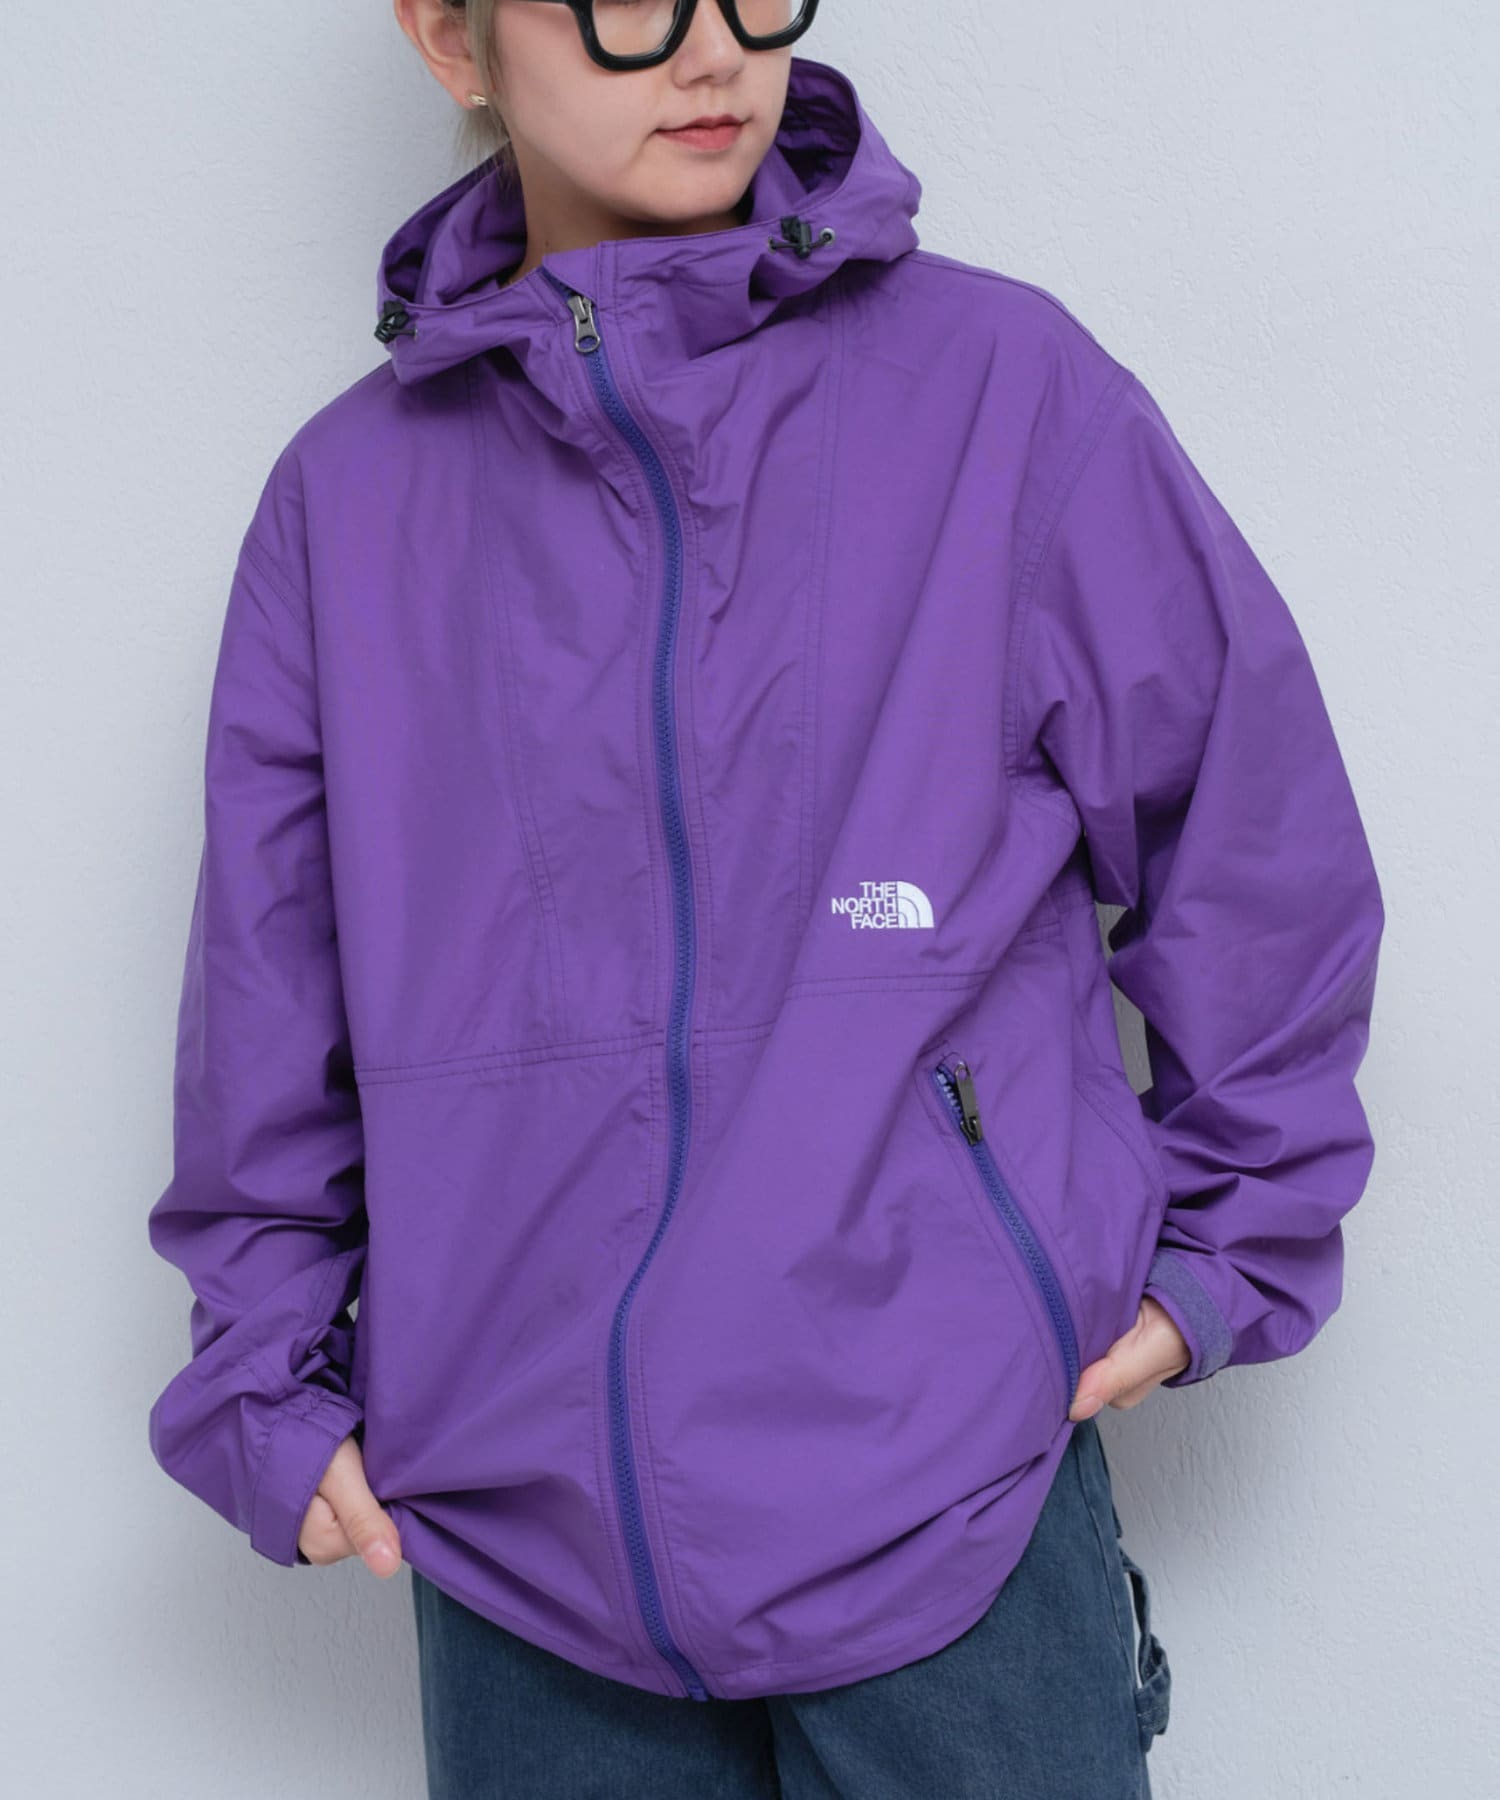 THE NORTH FACE】COMPACT JACKET | CIAOPANIC TYPY(チャオパニック 